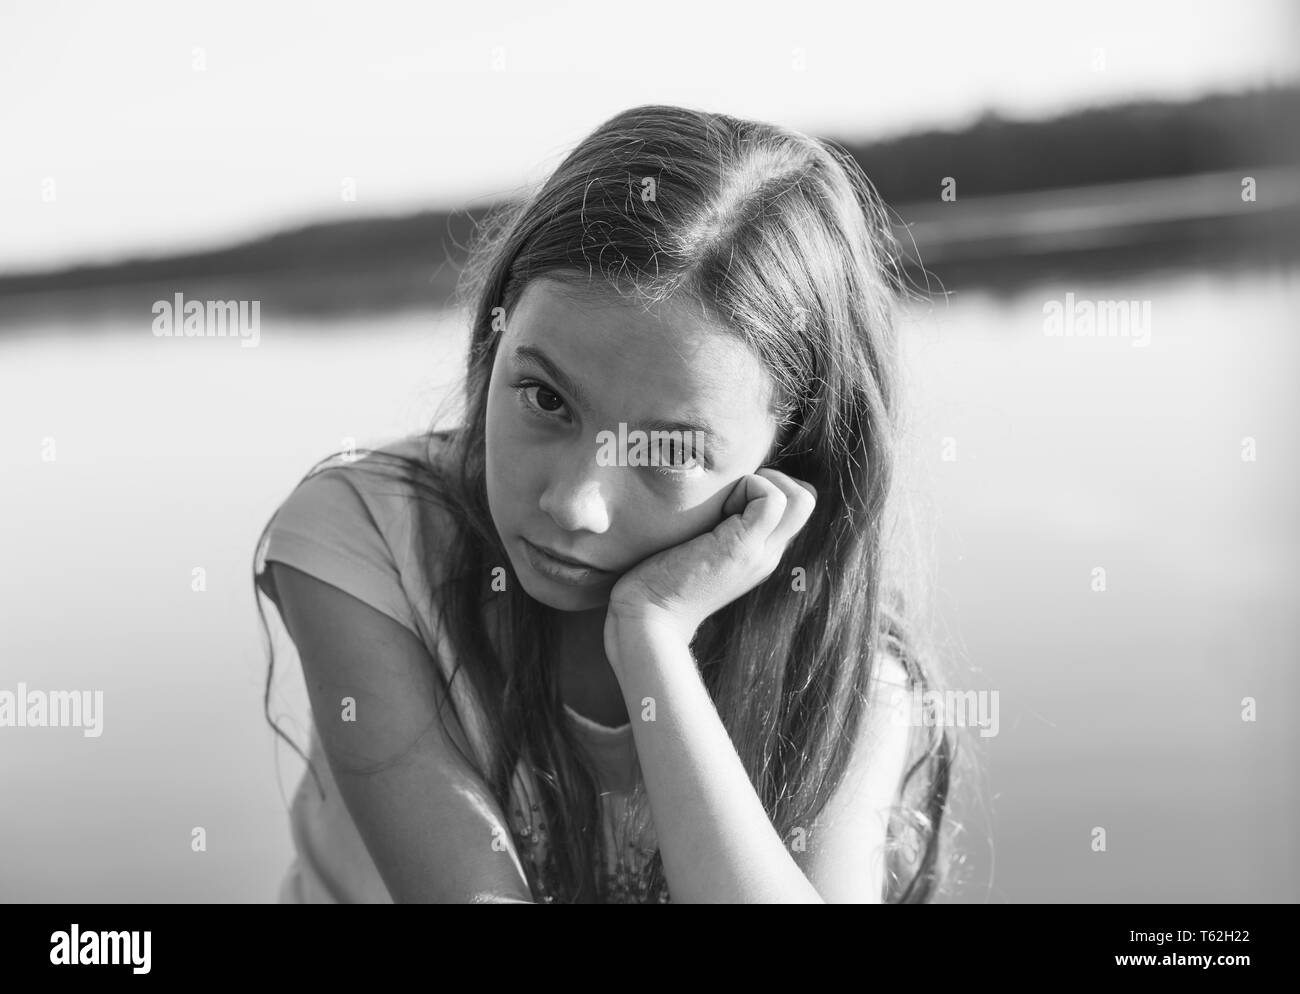 Black and white portrait of Sad Beautiful teen girl looking with serious face at seaside during sunset Stock Photo